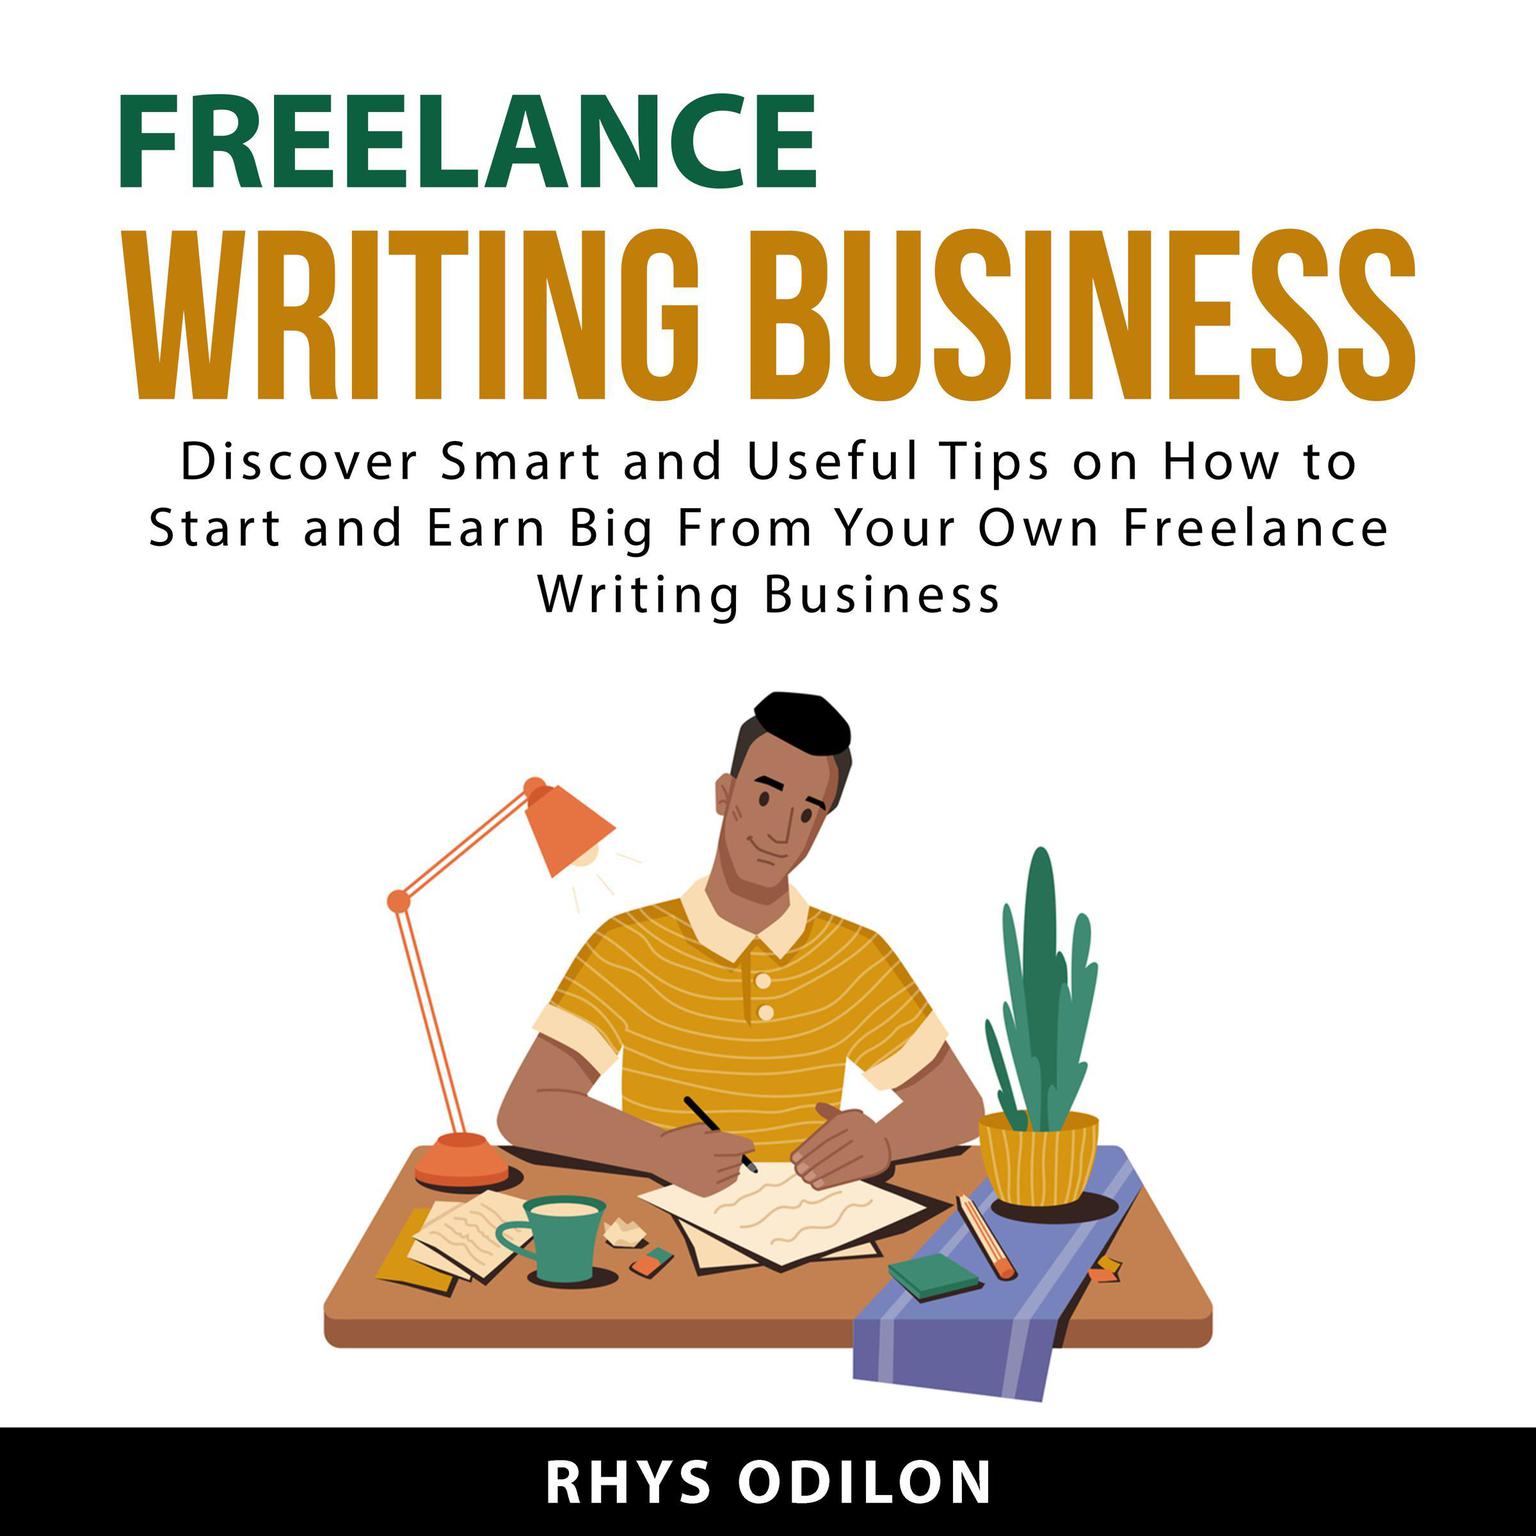 Freelance Writing Business: Discover Smart and Useful Tips on How to Start and Earn Big From Your Own Freelance Writing Business Audiobook, by Rhys Odilon